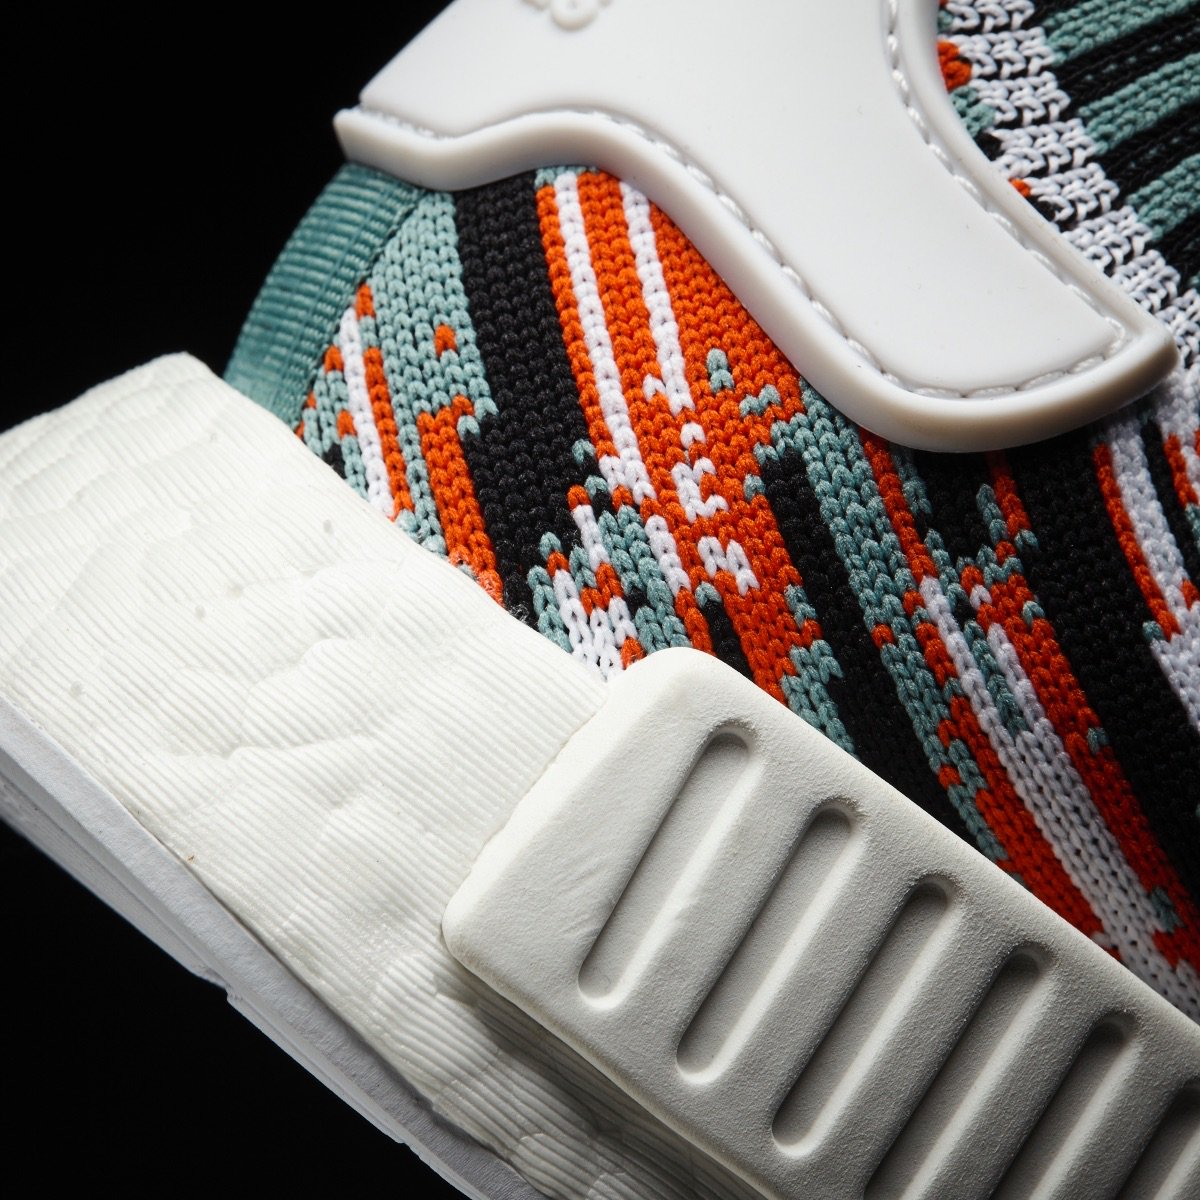 First Look at Gucci x Adidas Primeknit NMD White Bee NMD R1 Gucci